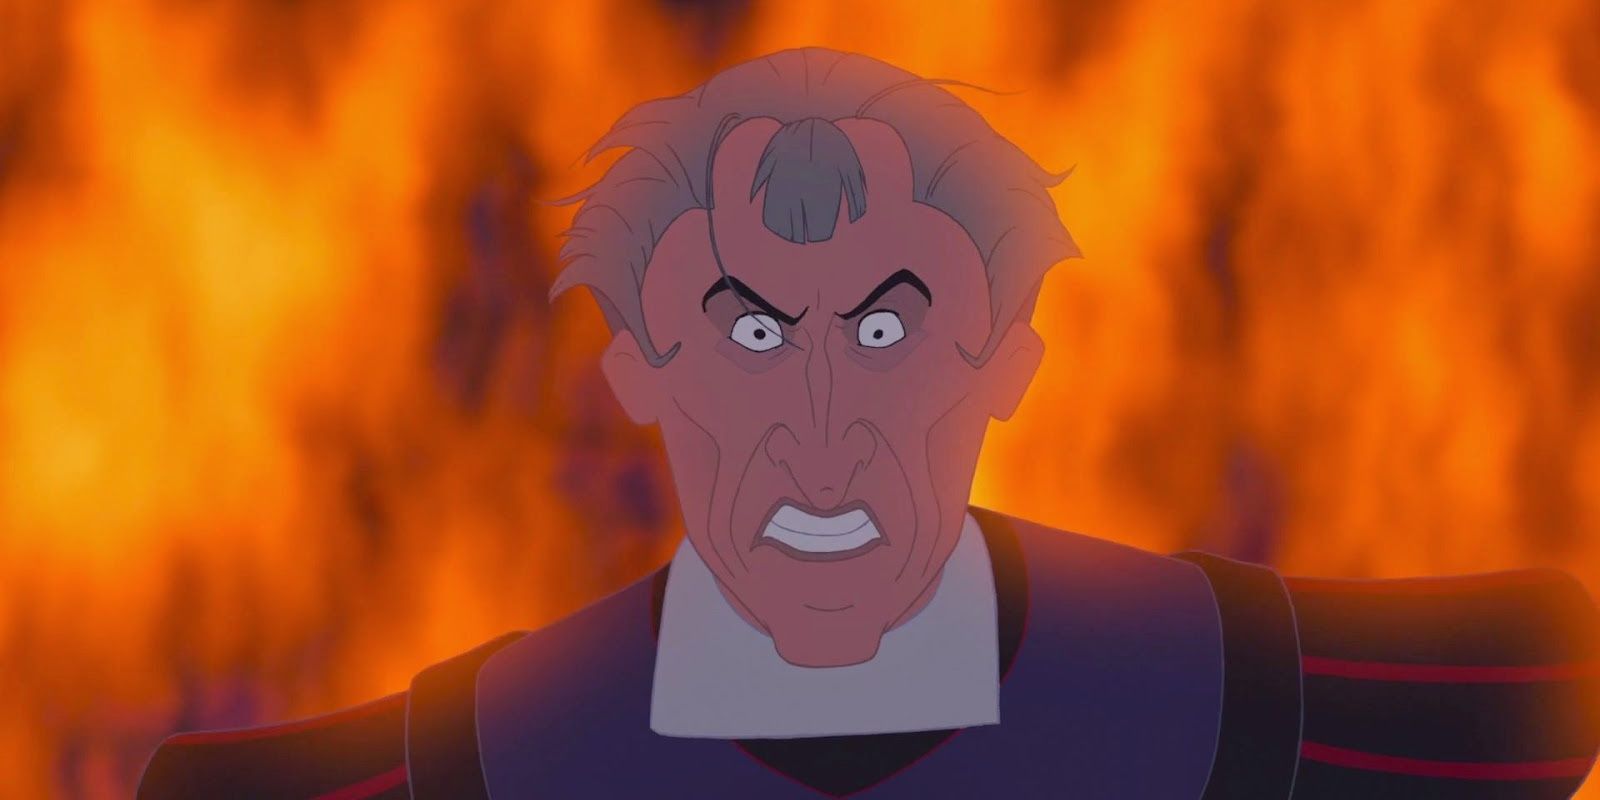 Claude Frollo looking angry with fire behind him in The Hunchback of Notre Dame